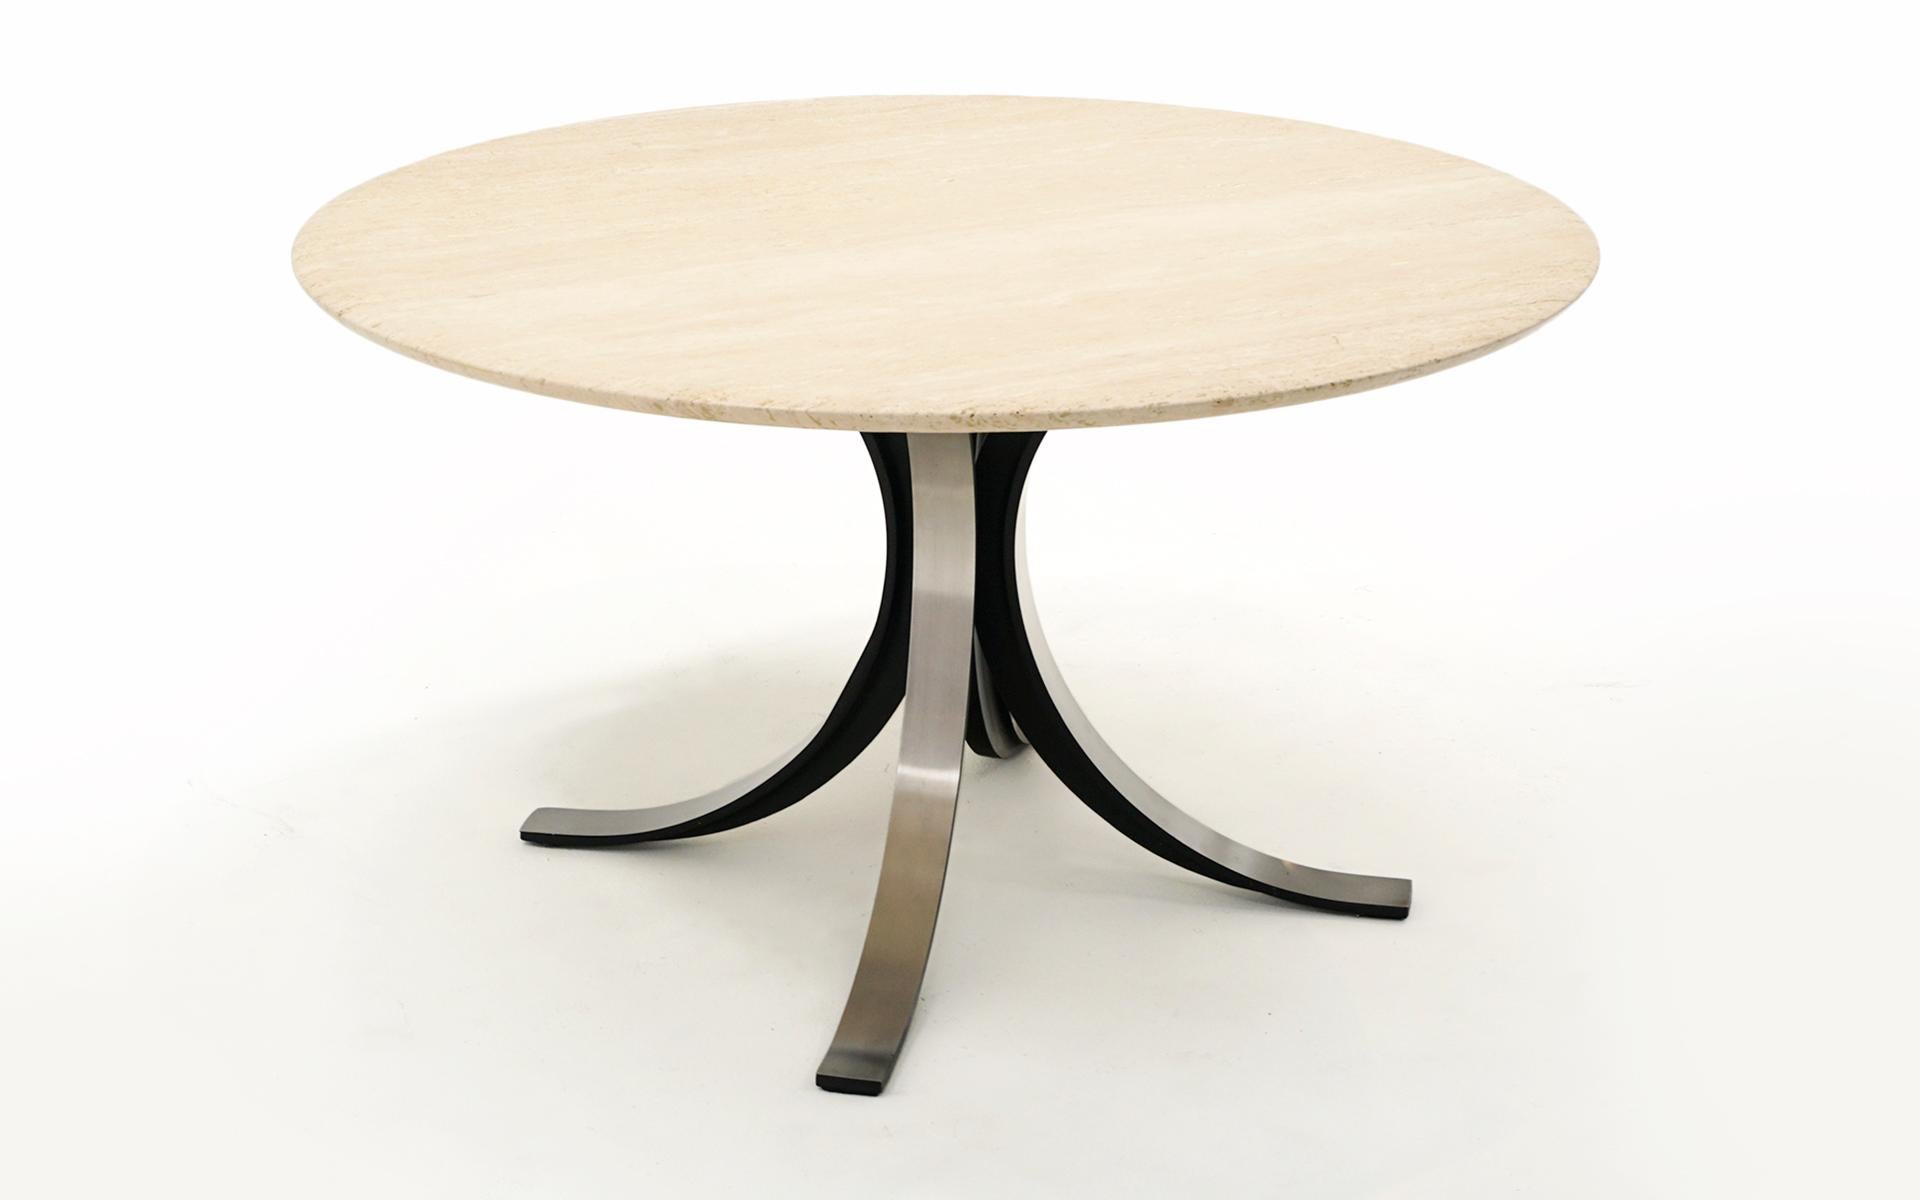 Osvaldo Borsani dining table or center table or game table with the original one inch thick travertine top with slightly tapered edge. Black steel base with aluminum panels. There is one water ring on the travertine that is only visible in raking